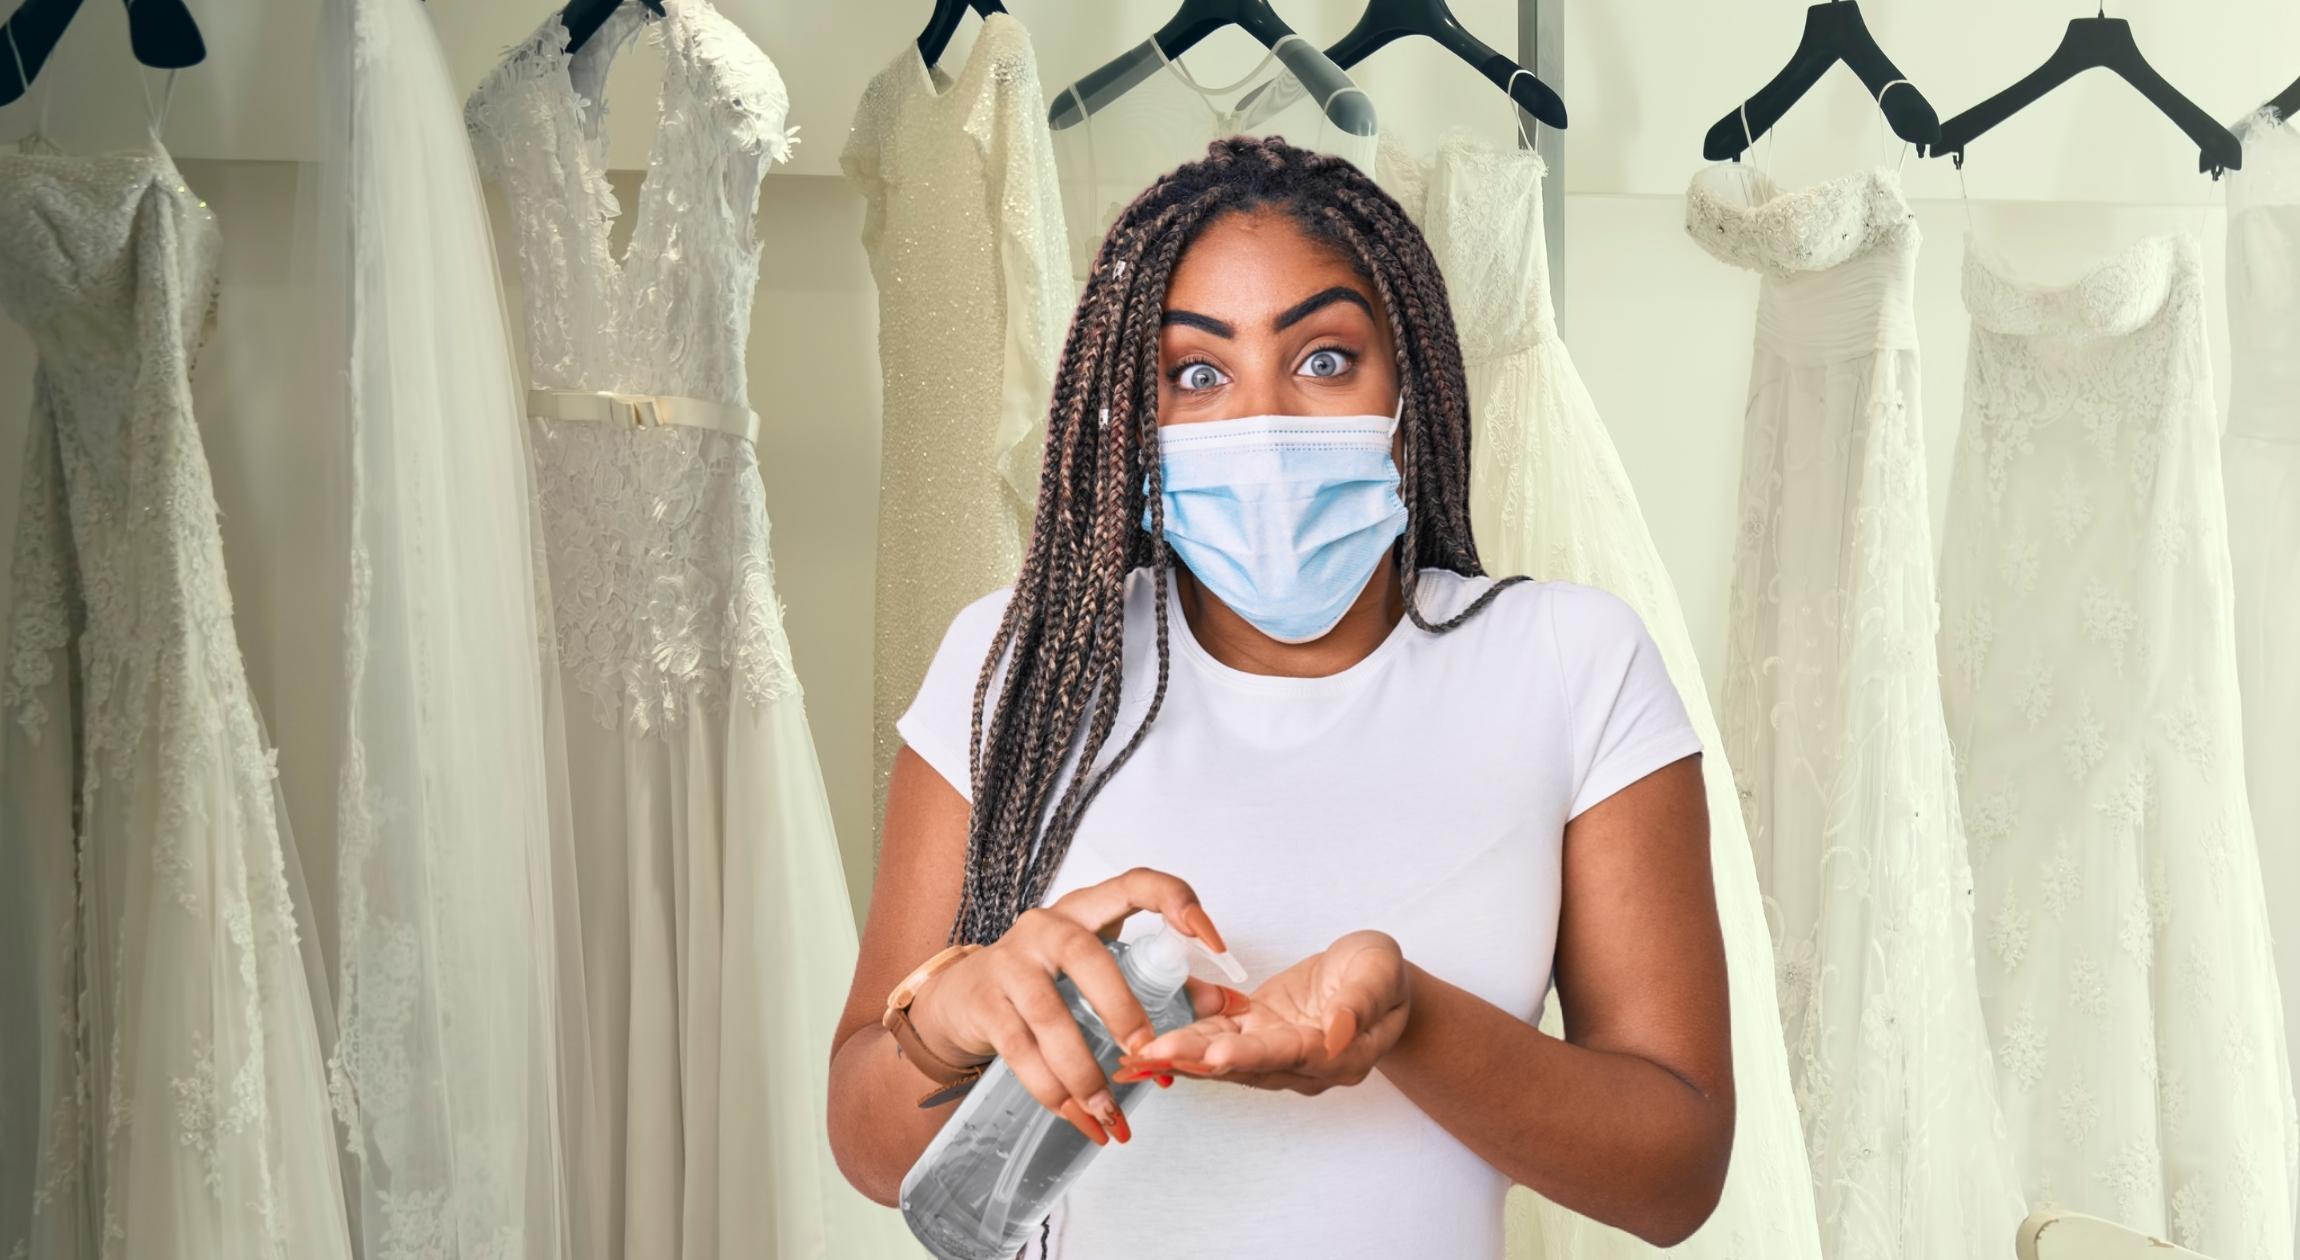 A Black woman wearing a medical mask and pumping sanitizer in her hand in front of several wedding dresses